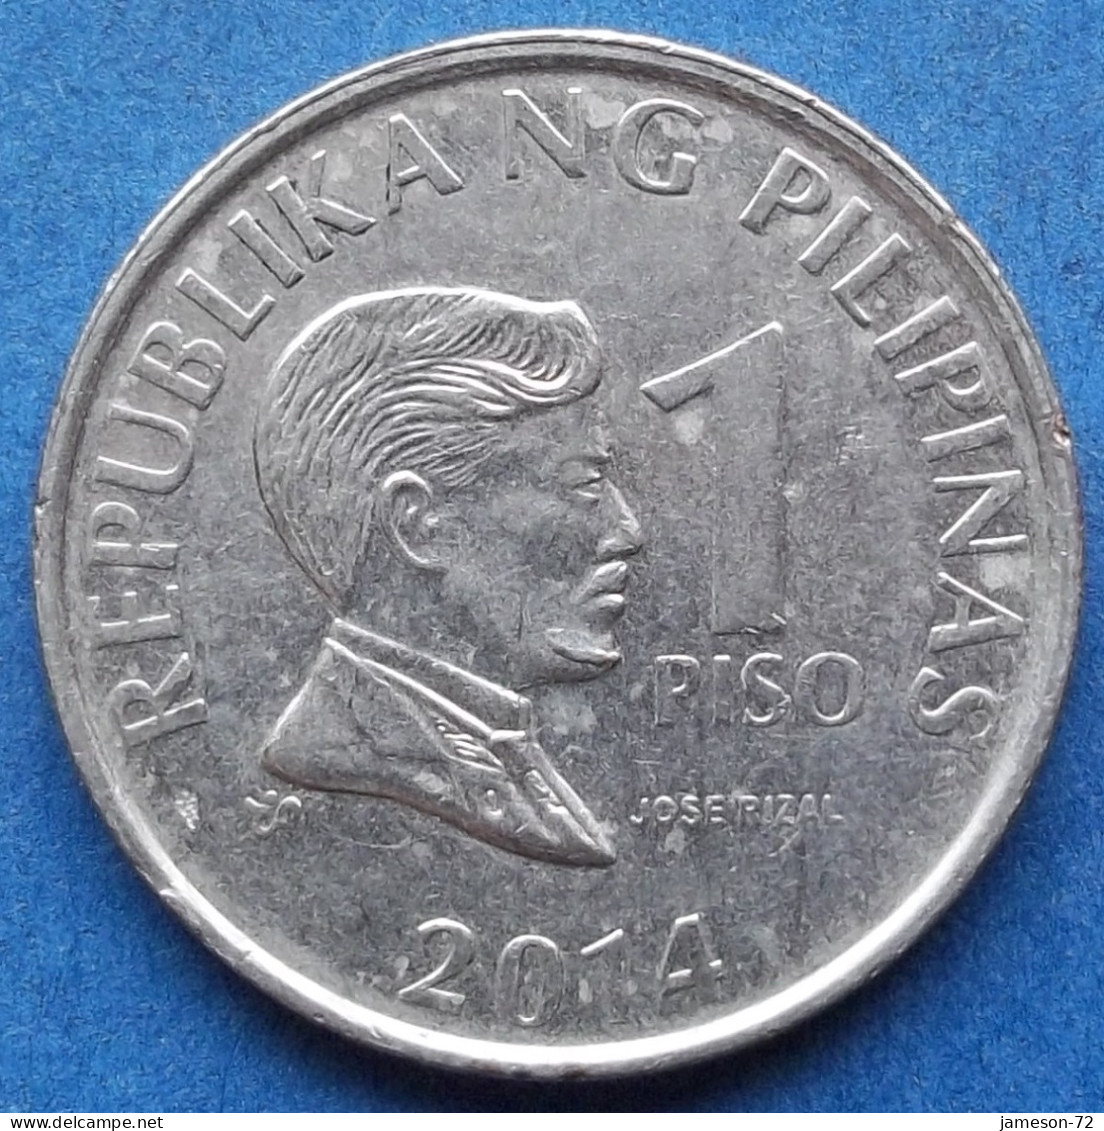 PHILIPPINES - 1 Piso 2014 "Jose Rizal" KM# 269a Monetary Reform (1967) - Edelweiss Coins - Philippinen